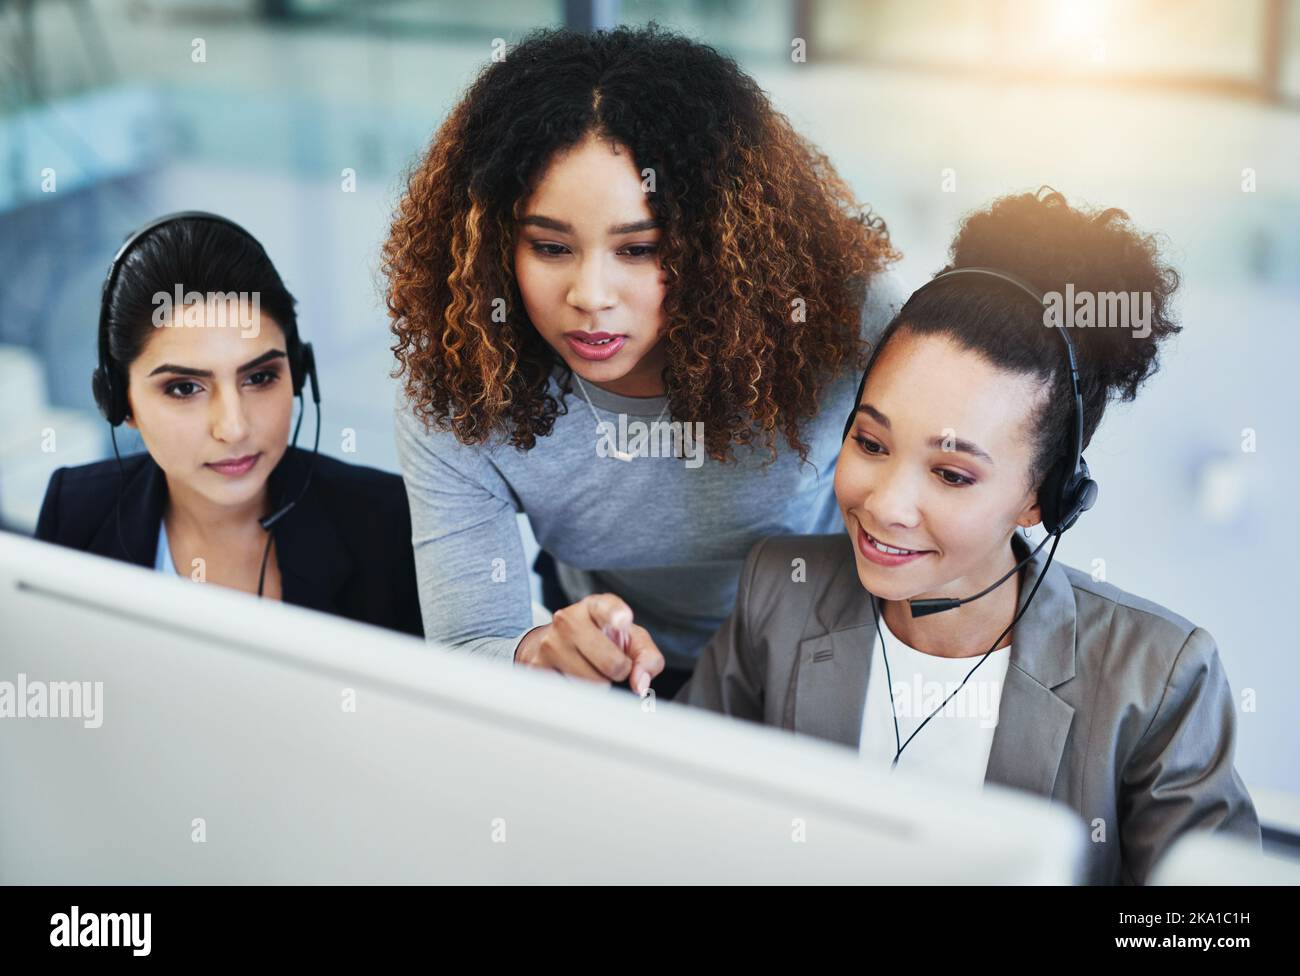 Working together to resolve your issues with speed. a young woman assisting her colleagues in a call centre. Stock Photo